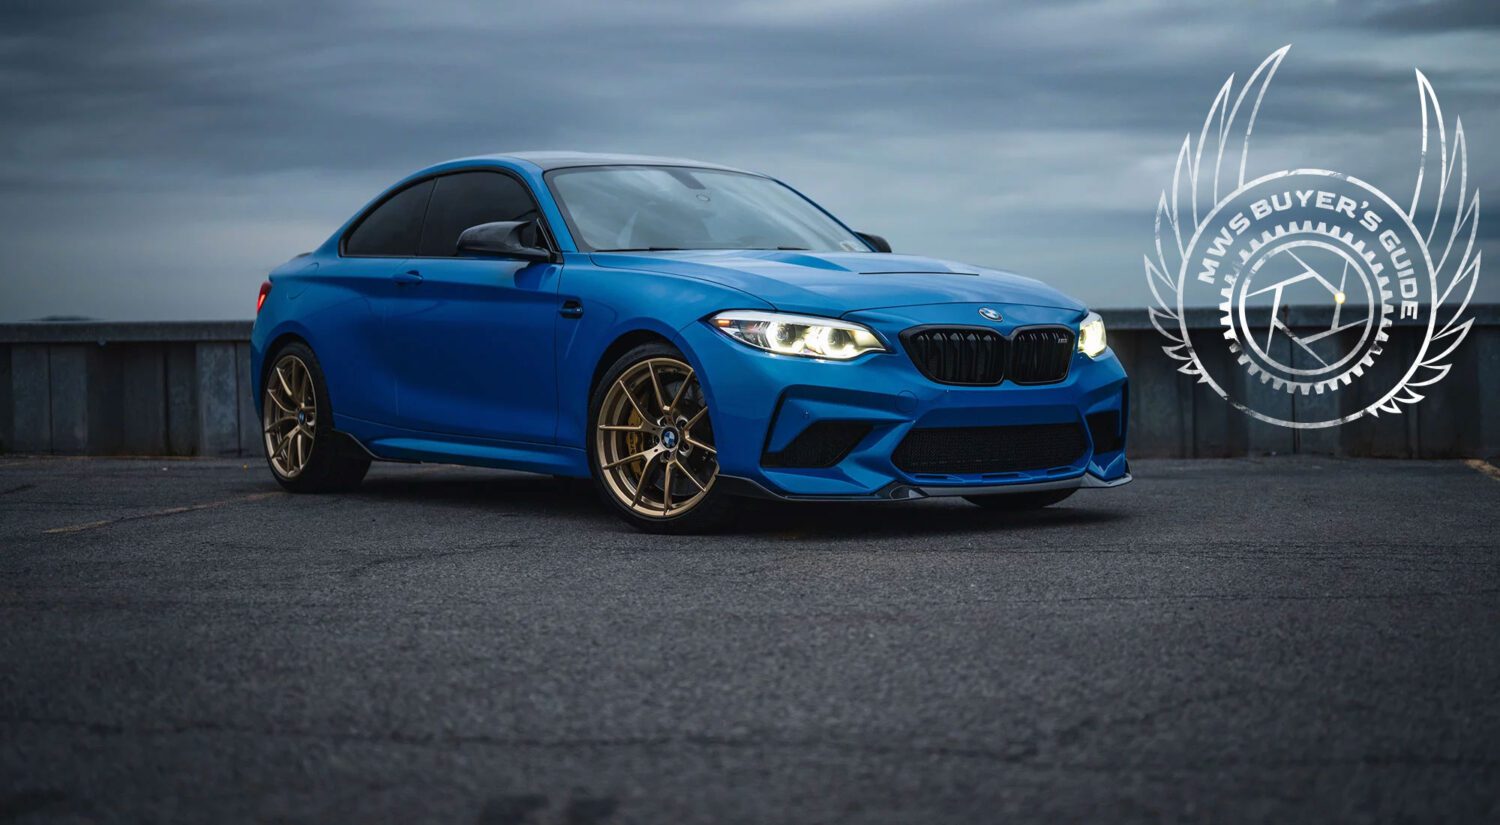 The BMW F87 M2 Buyer’s guide